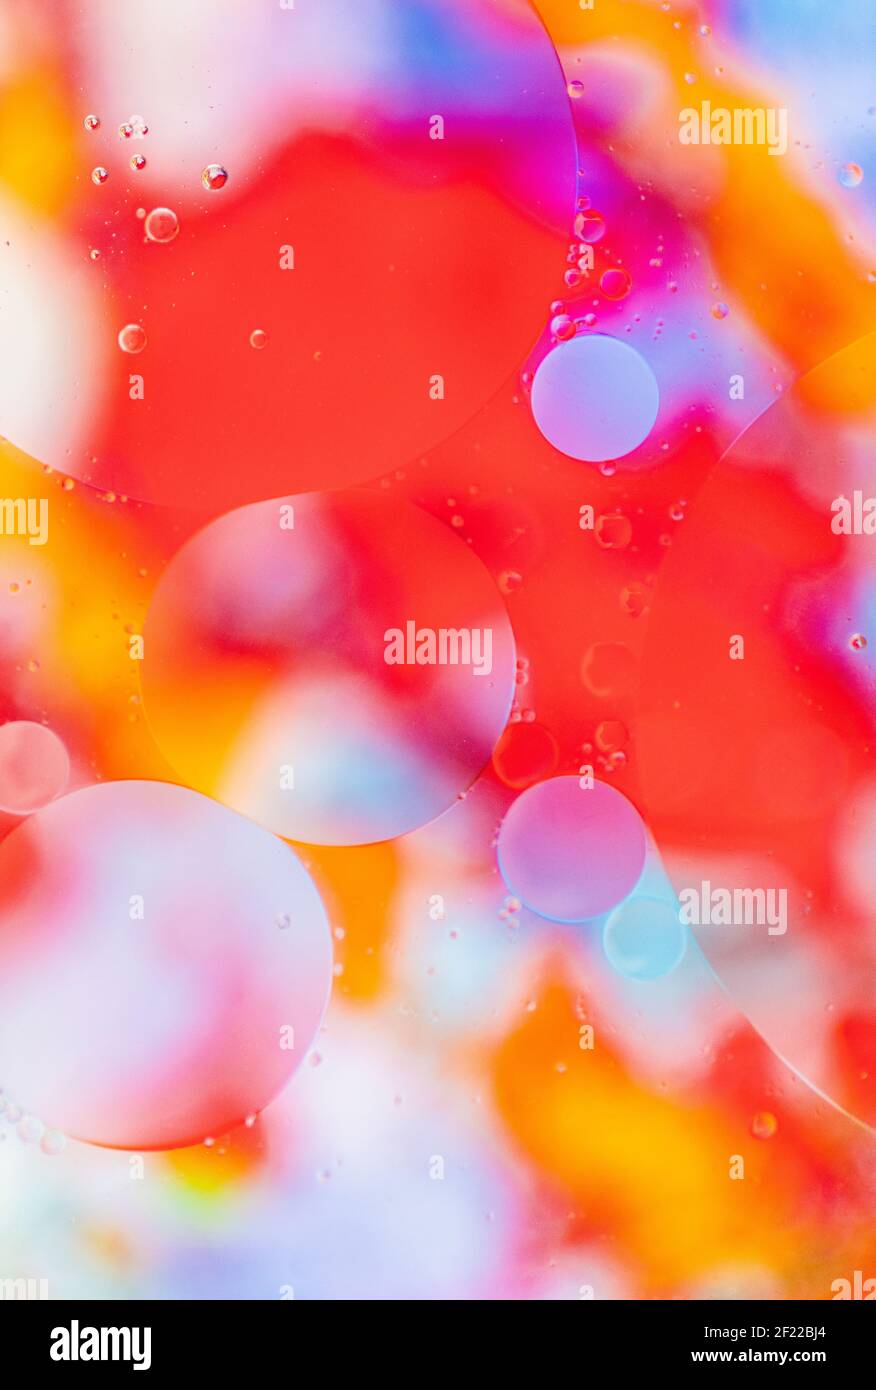 Colourful bubbles, abstract bubbles on surface, arty bubbles, oil bubbles, farbenfrohe Kreise, Abstrakte Fotografie Stock Photo